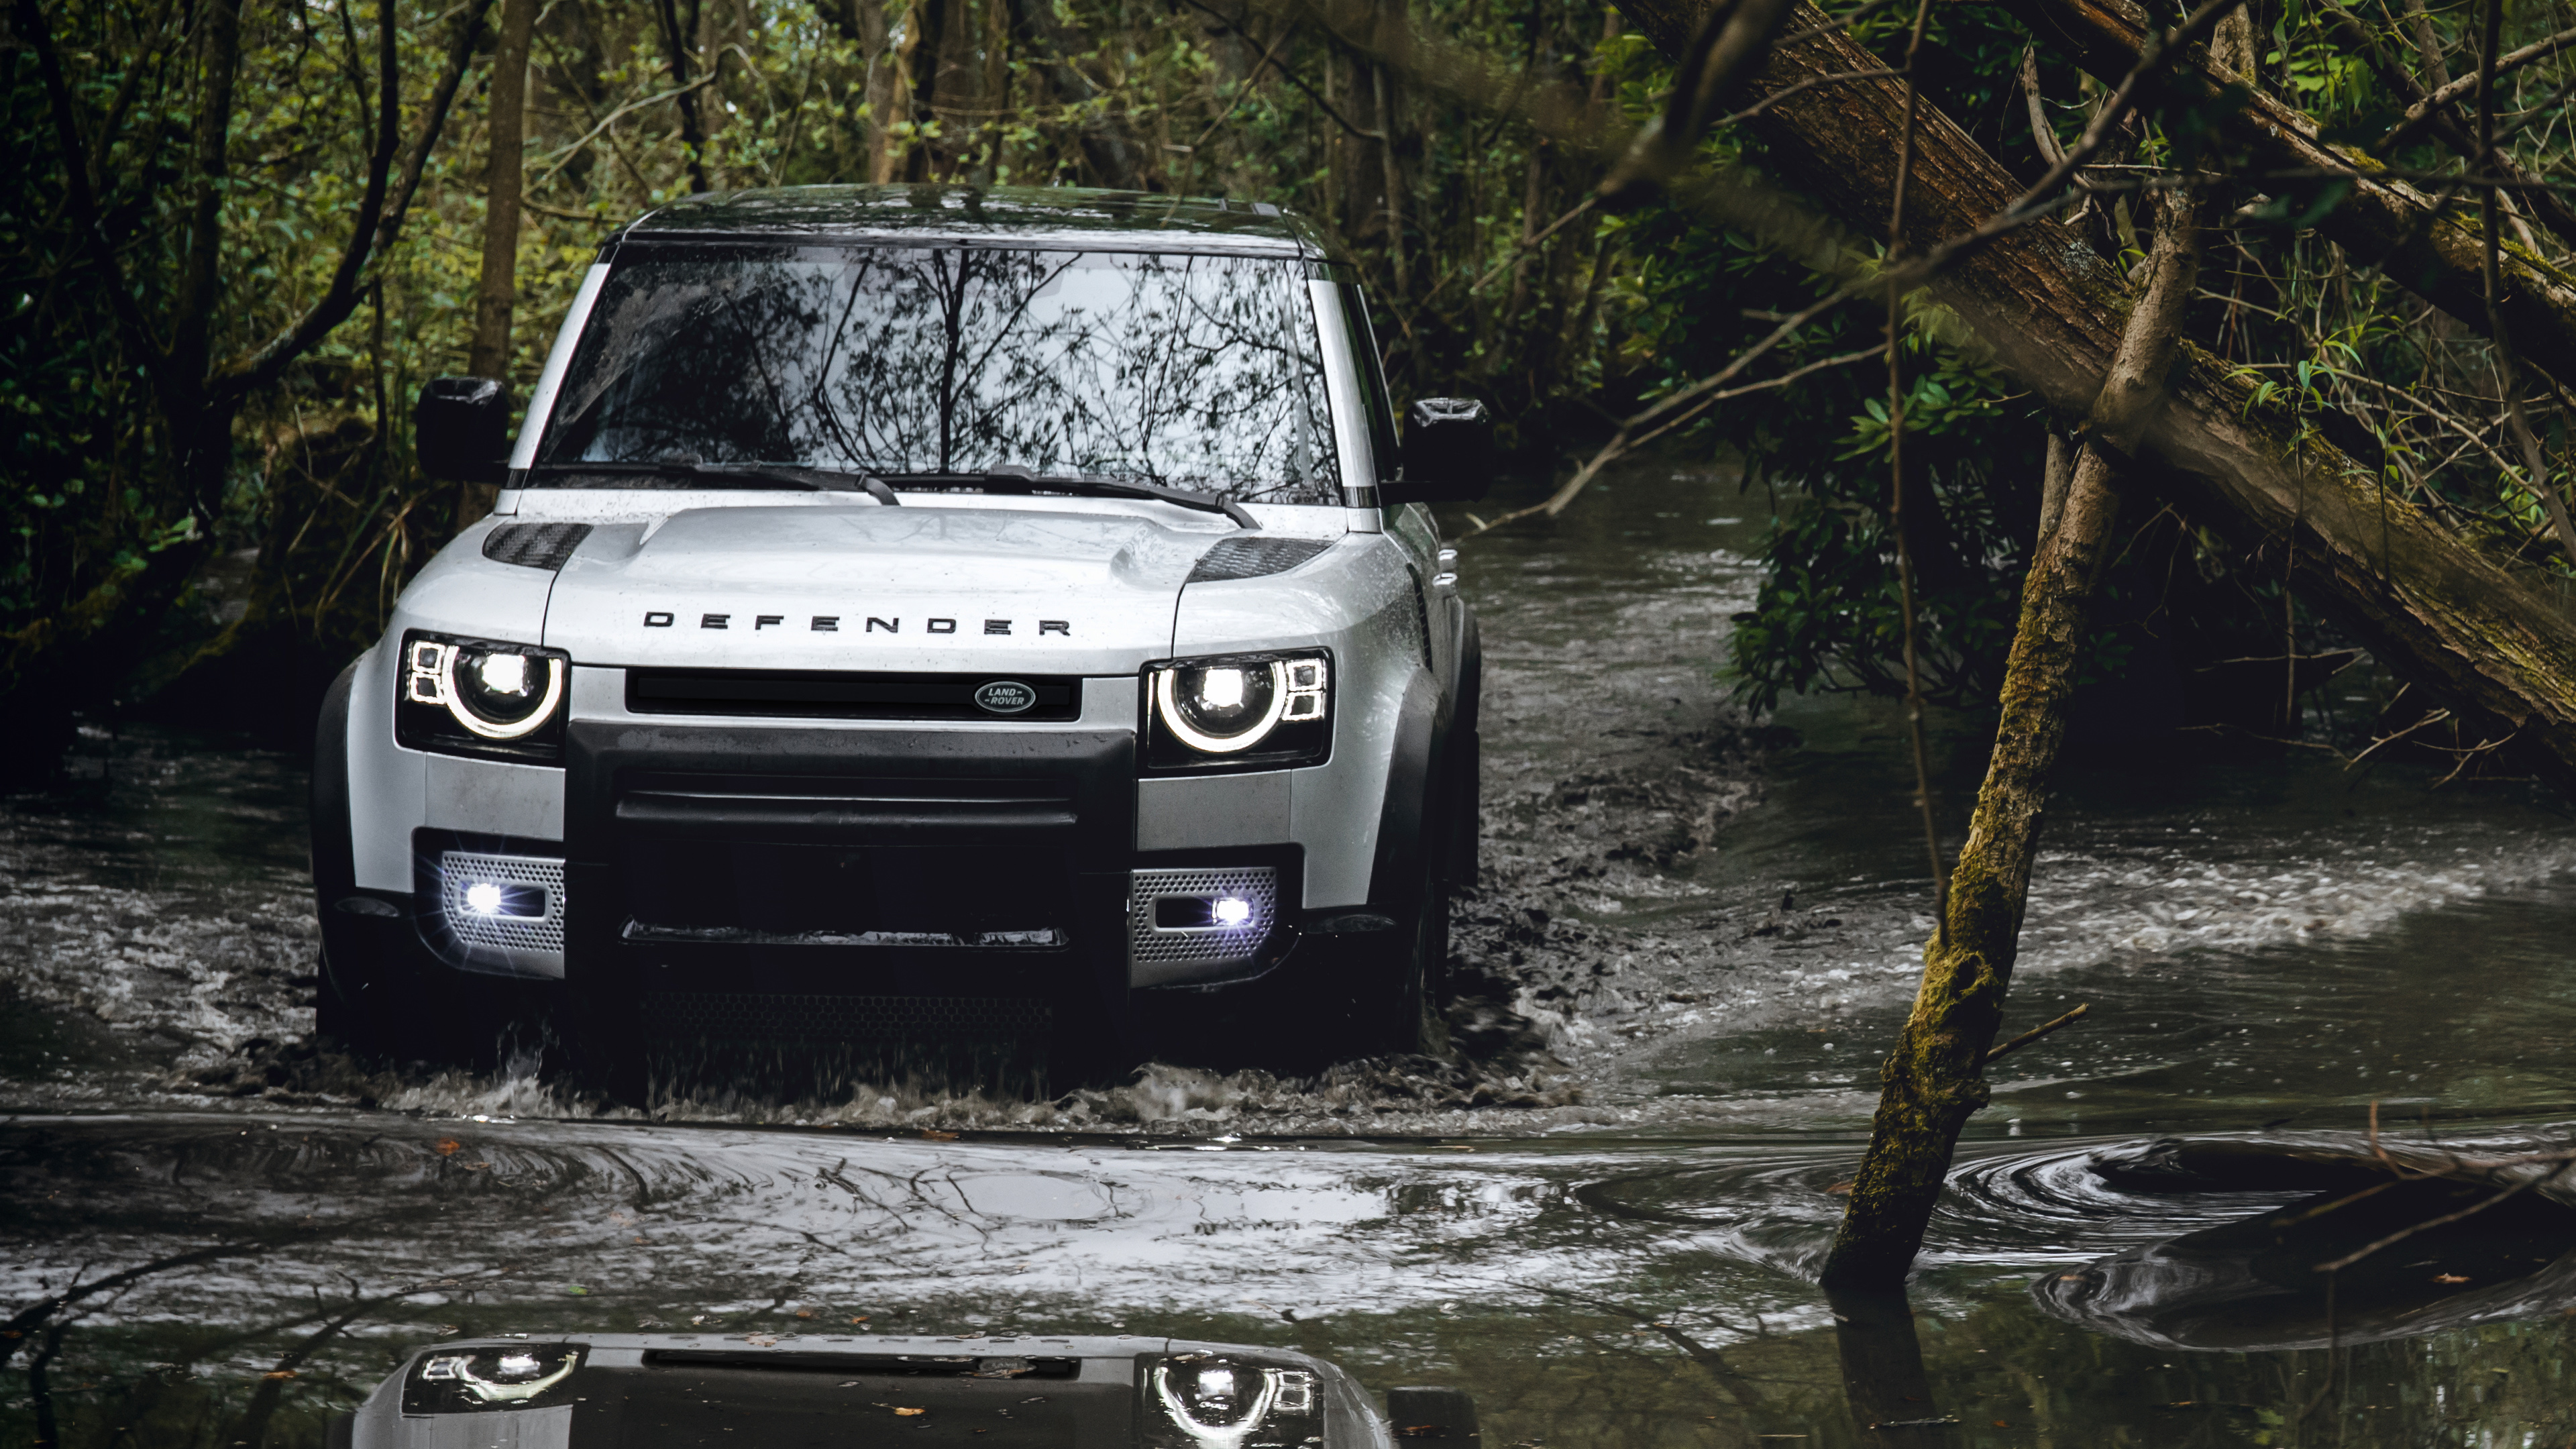 Range Rover Hd Wallpapers For Mobile Download